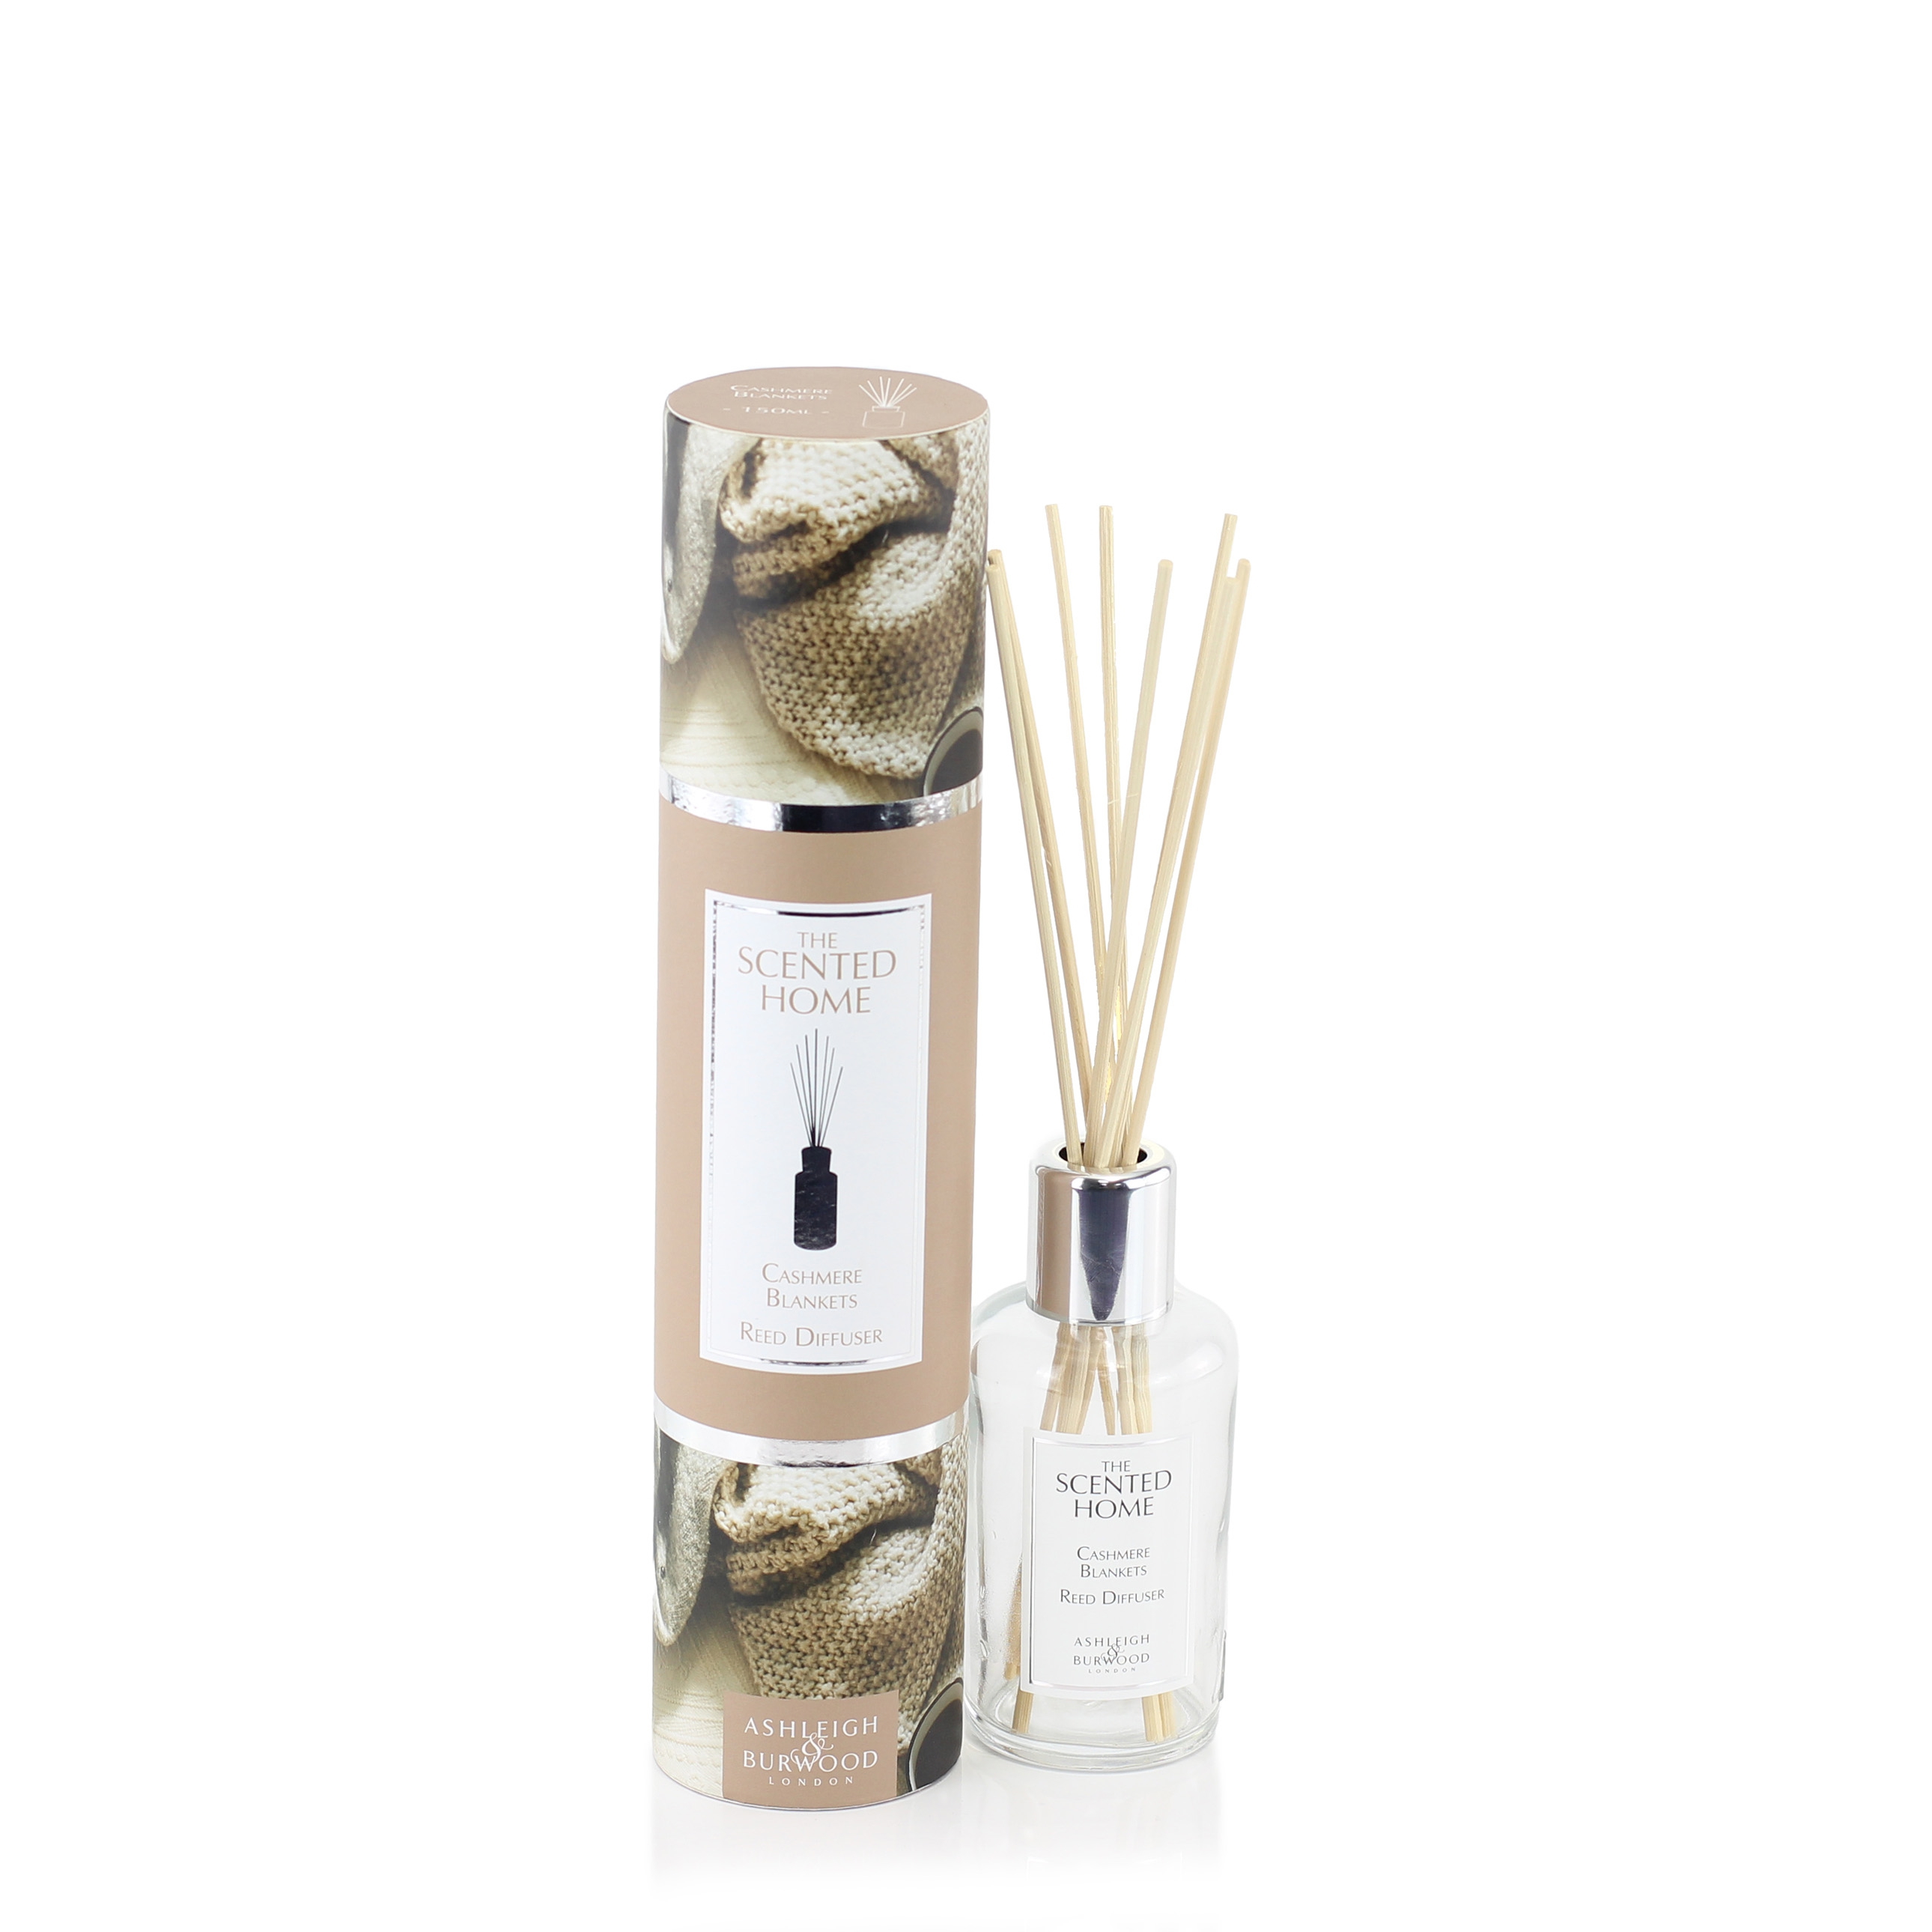 Cashmere Blankets 150ml Diffuser The Scented Home